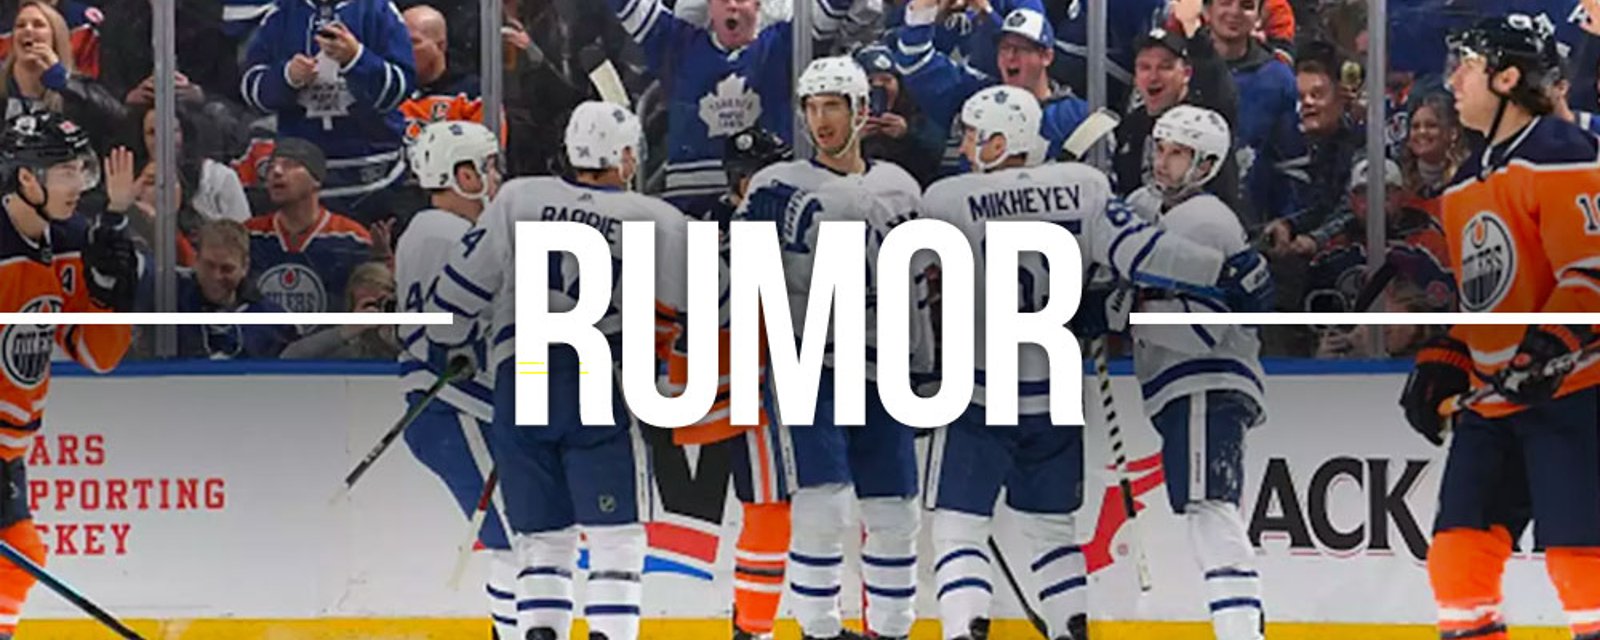 Major trade brewing between Leafs and Oilers?